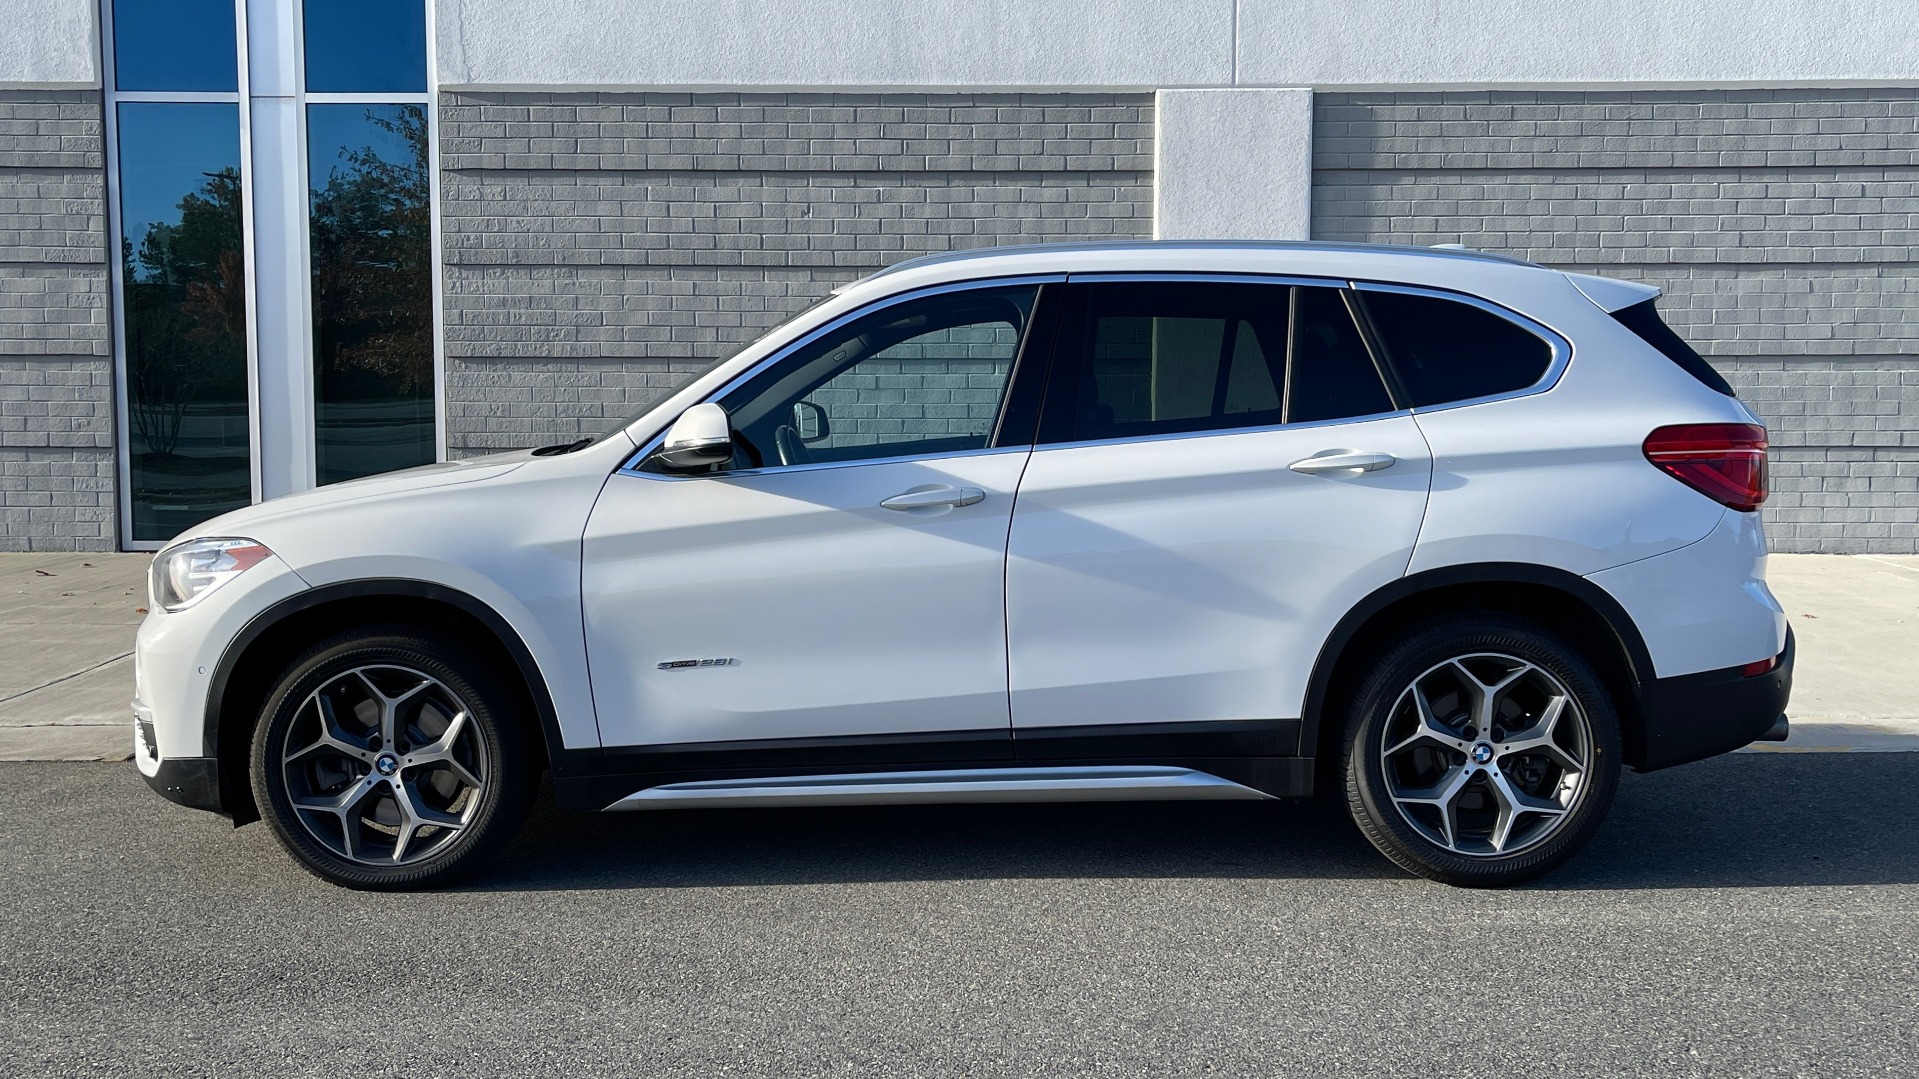 Used 2018 BMW X1 SDRIVE28I 2.0L / PARK DIST CNTRL / 18IN WHEELS / REARVIEW for sale Sold at Formula Imports in Charlotte NC 28227 2